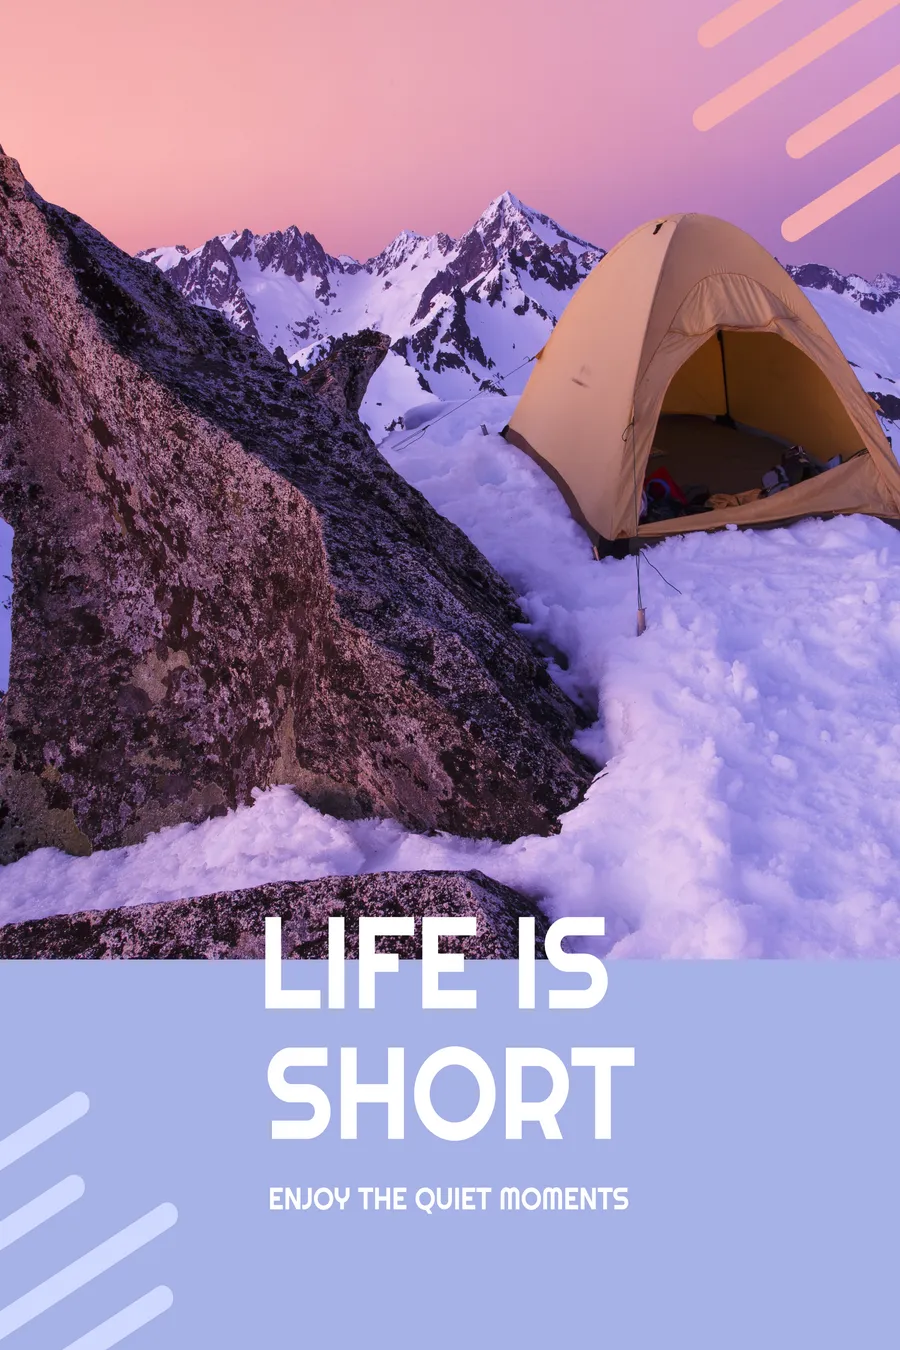 Poster 20 x 30 life is short posters template